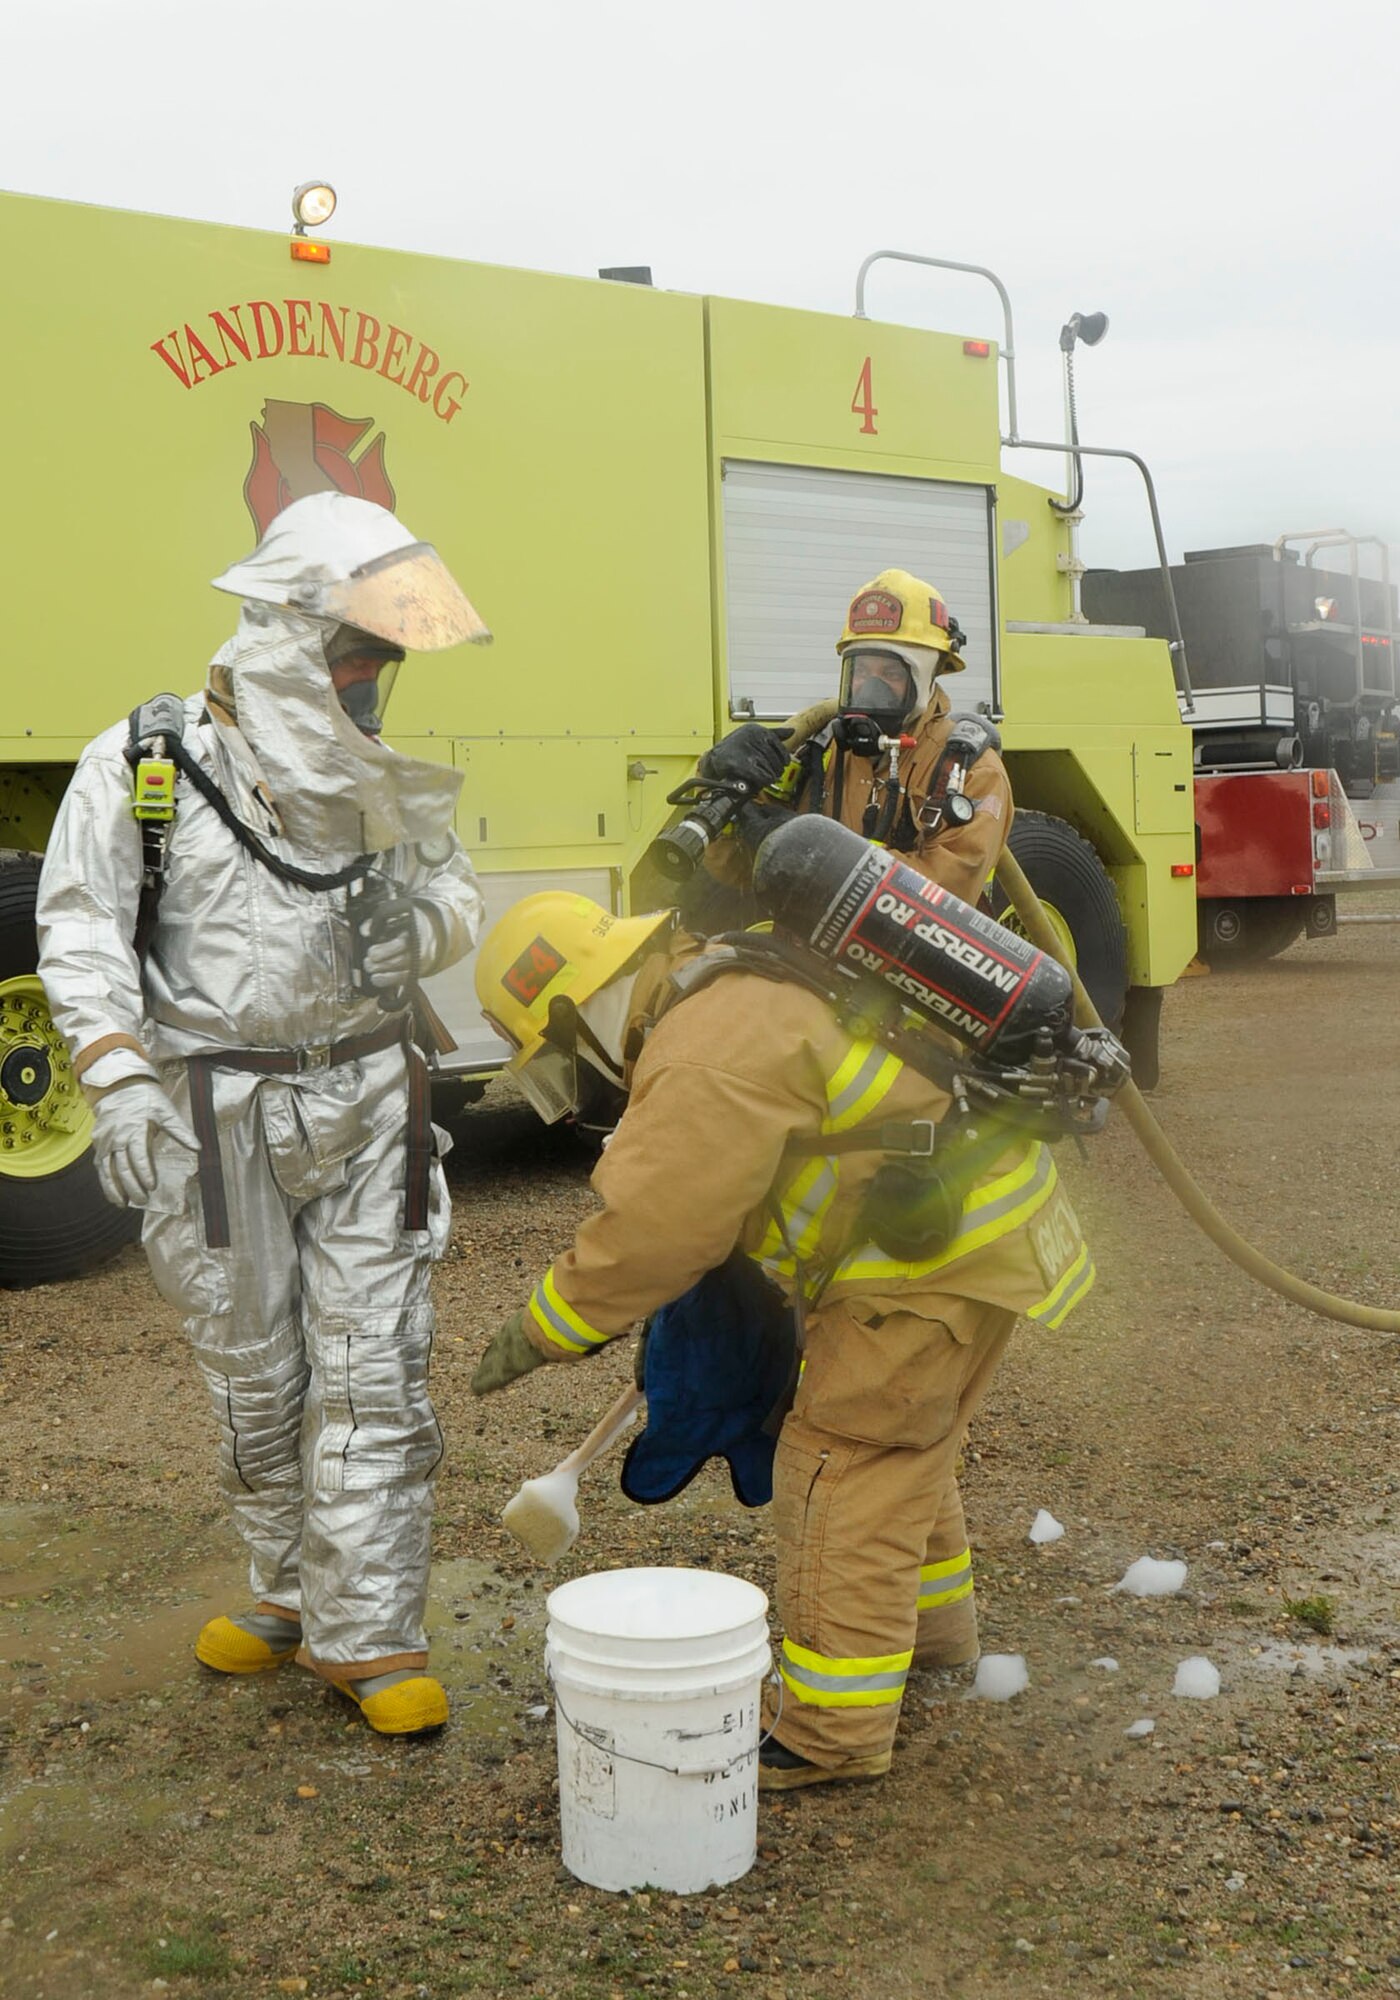 VANDENBERG AIR FORCE BASE, Calif.  -- Members of the 30th Civil Engineer Squadron's fire department go through the decontamination process after putting out flames for an exercise  C-17 Globemaster III crash Jan. 22. The crash was part of a Foggy Shores Exercise that prepares and evaluates the base's performance and response to a real world crisis situation. (U.S Air Force photo/Senior Airman Stephanie Longoria)